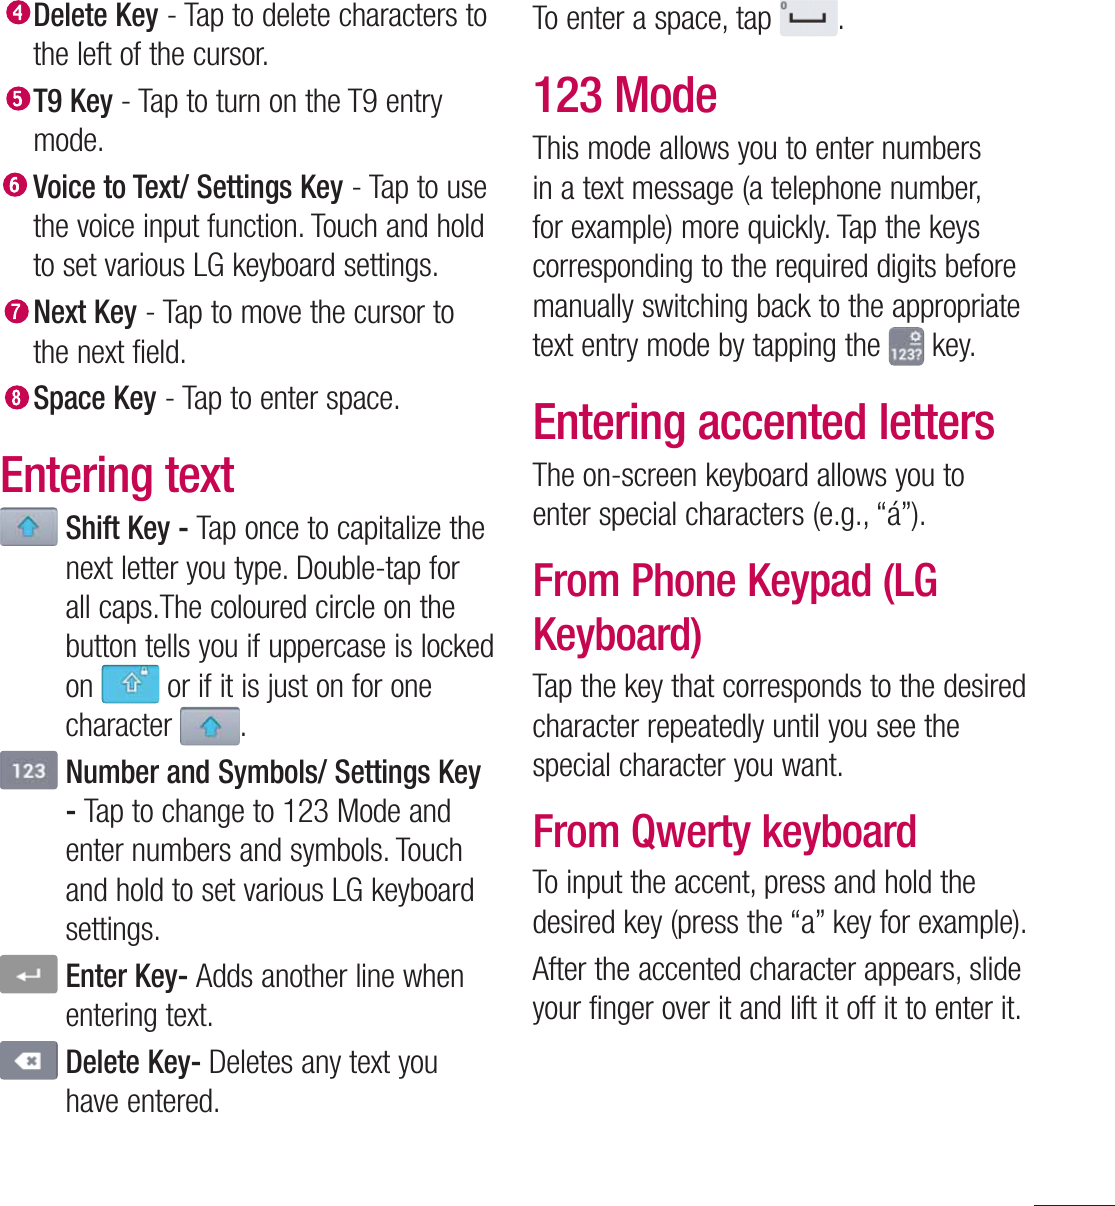 41 Delete Key - Tap to delete characters to the left of the cursor. T9 Key - Tap to turn on the T9 entry mode. Voice to Text/ Settings Key - Tap to use the voice input function. Touch and hold to set various LG keyboard settings. Next Key - Tap to move the cursor to the next field.  Space Key - Tap to enter space.Entering text  Shift Key - Tap once to capitalize the next letter you type. Double-tap for all caps.The coloured circle on the button tells you if uppercase is locked on   or if it is just on for one character  .  Number and Symbols/ Settings Key - Tap to change to 123 Mode and enter numbers and symbols. Touch and hold to set various LG keyboard settings.   Enter Key- Adds another line when entering text.  Delete Key- Deletes any text you have entered.To enter a space, tap  .123 ModeThis mode allows you to enter numbers in a text message (a telephone number, for example) more quickly. Tap the keys corresponding to the required digits before manually switching back to the appropriate text entry mode by tapping the   key.Entering accented lettersThe on-screen keyboard allows you to enter special characters (e.g., “á”).From Phone Keypad (LG Keyboard)Tap the key that corresponds to the desired character repeatedly until you see the special character you want.From Qwerty keyboardTo input the accent, press and hold the desired key (press the “a” key for example).After the accented character appears, slide your finger over it and lift it off it to enter it.